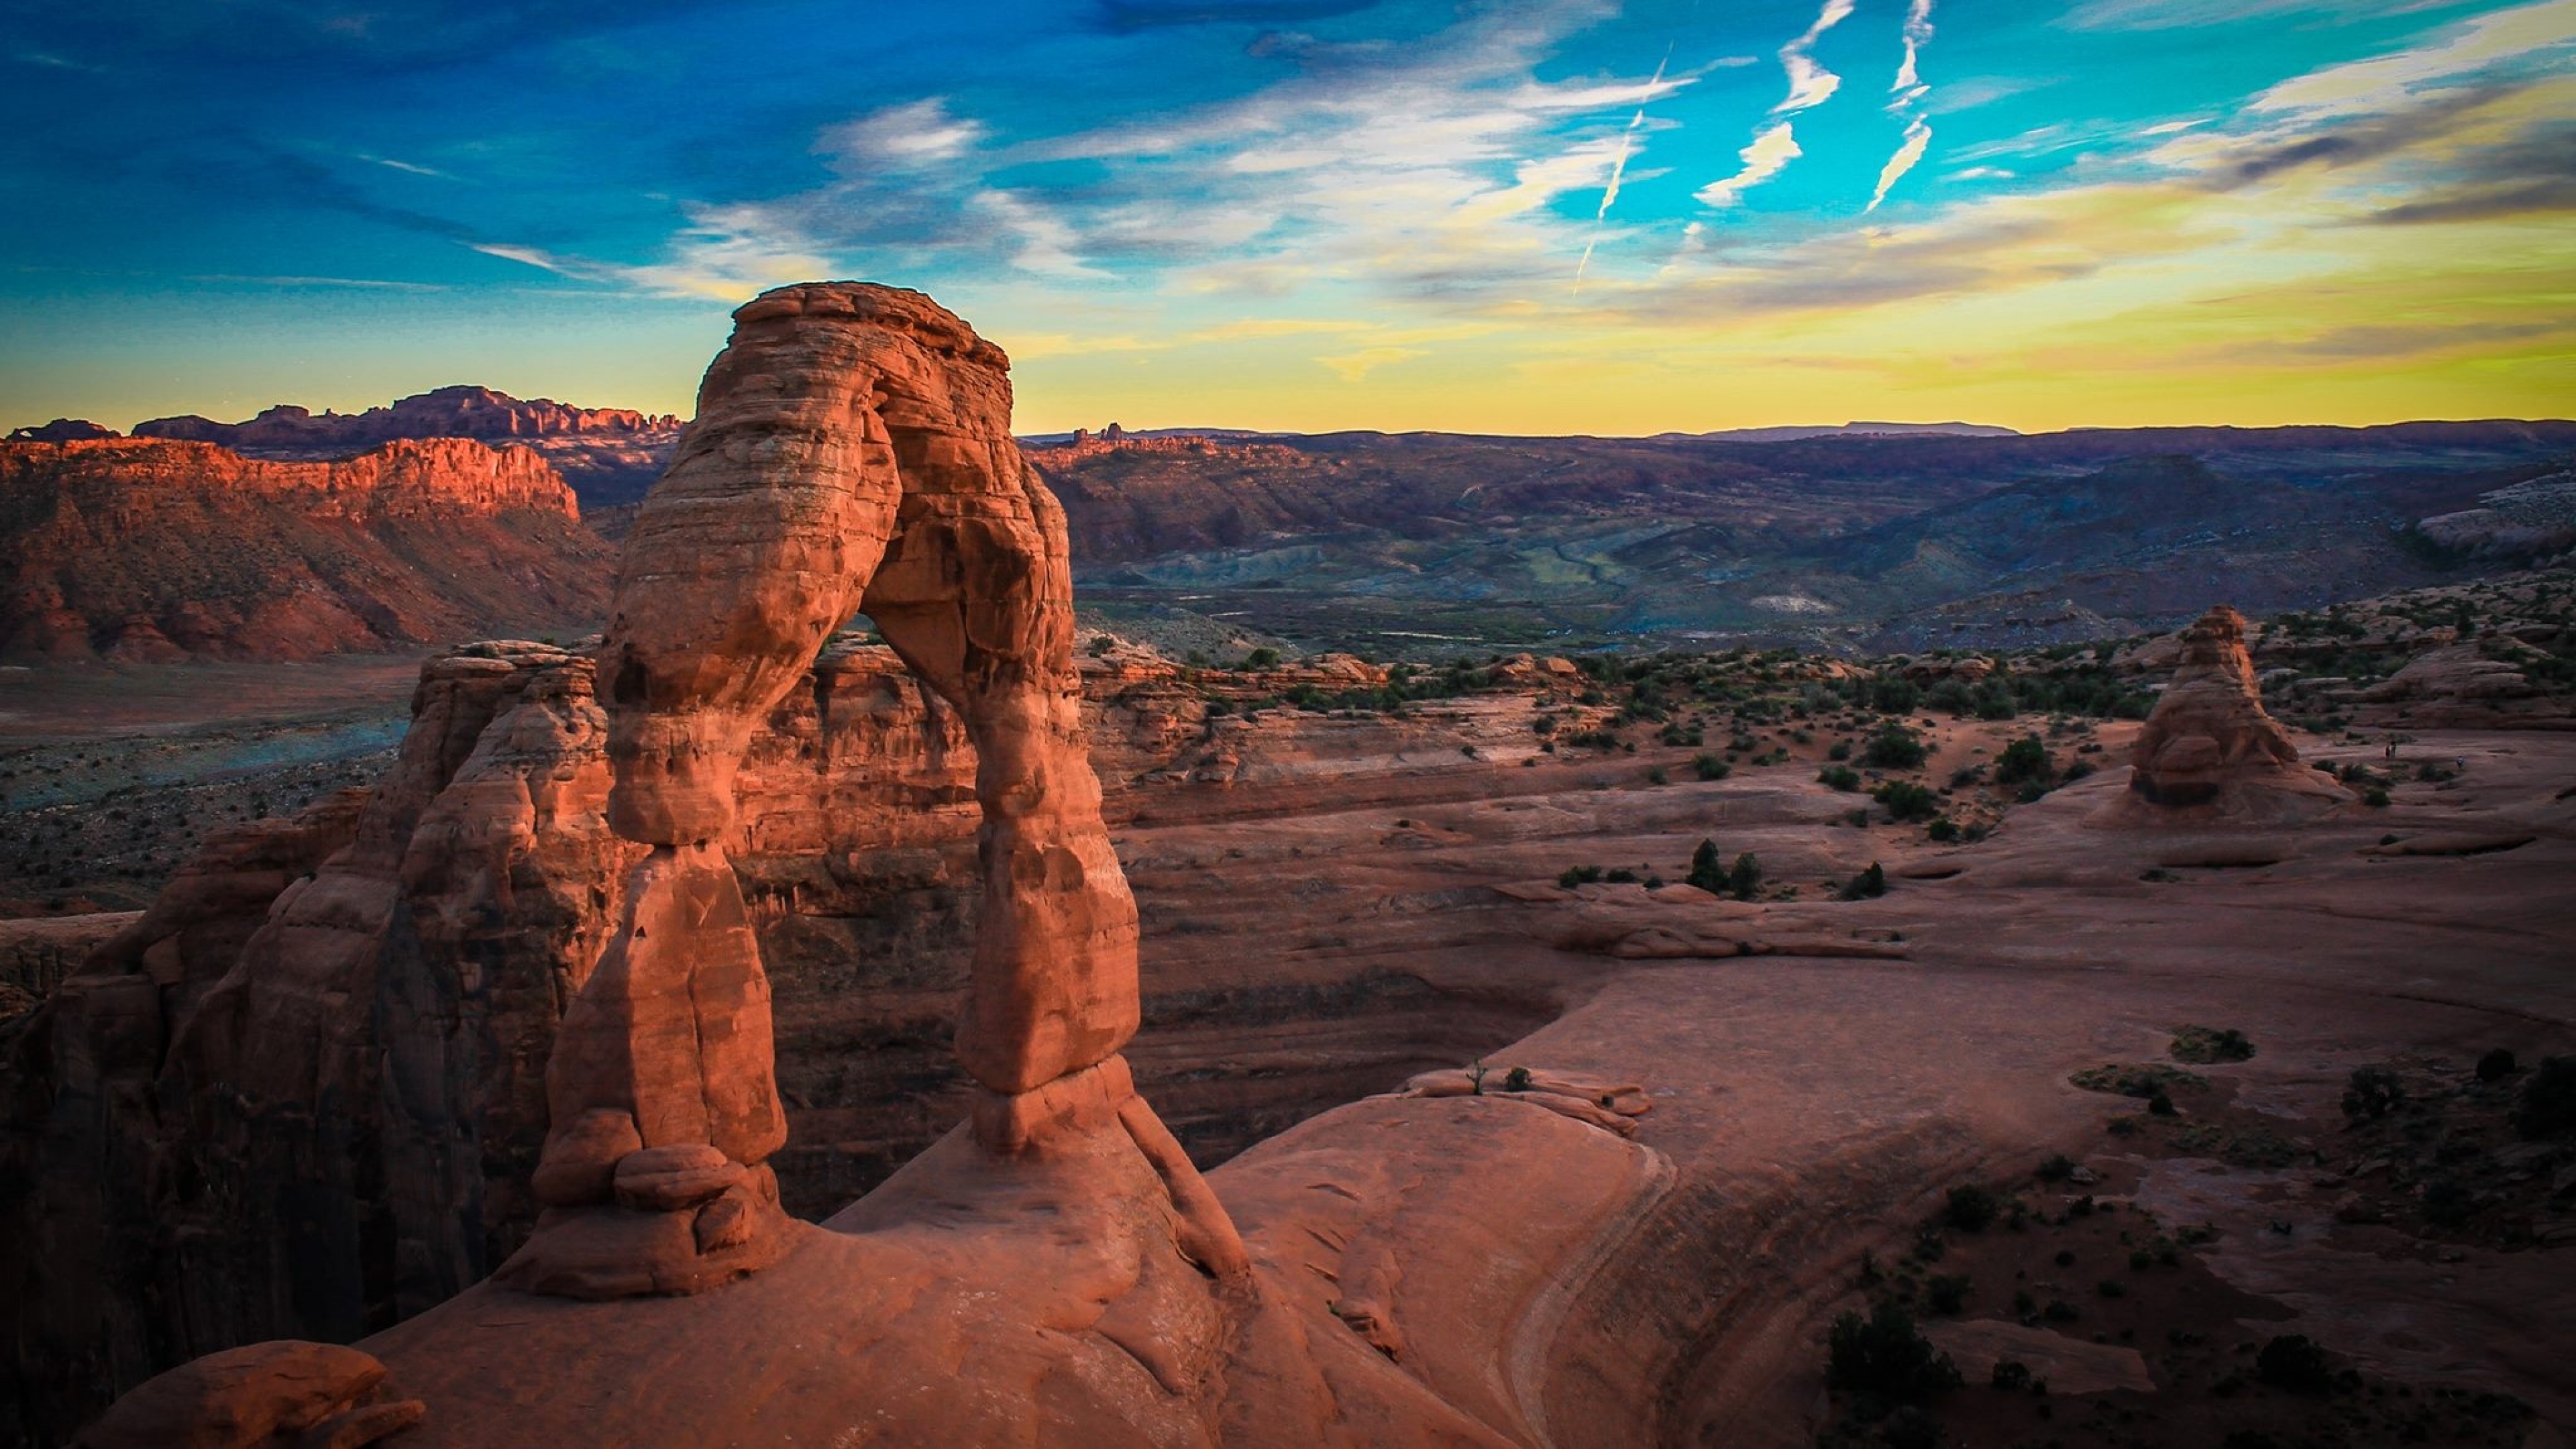 Wallpaper Stone Arches Sky Geology 4k